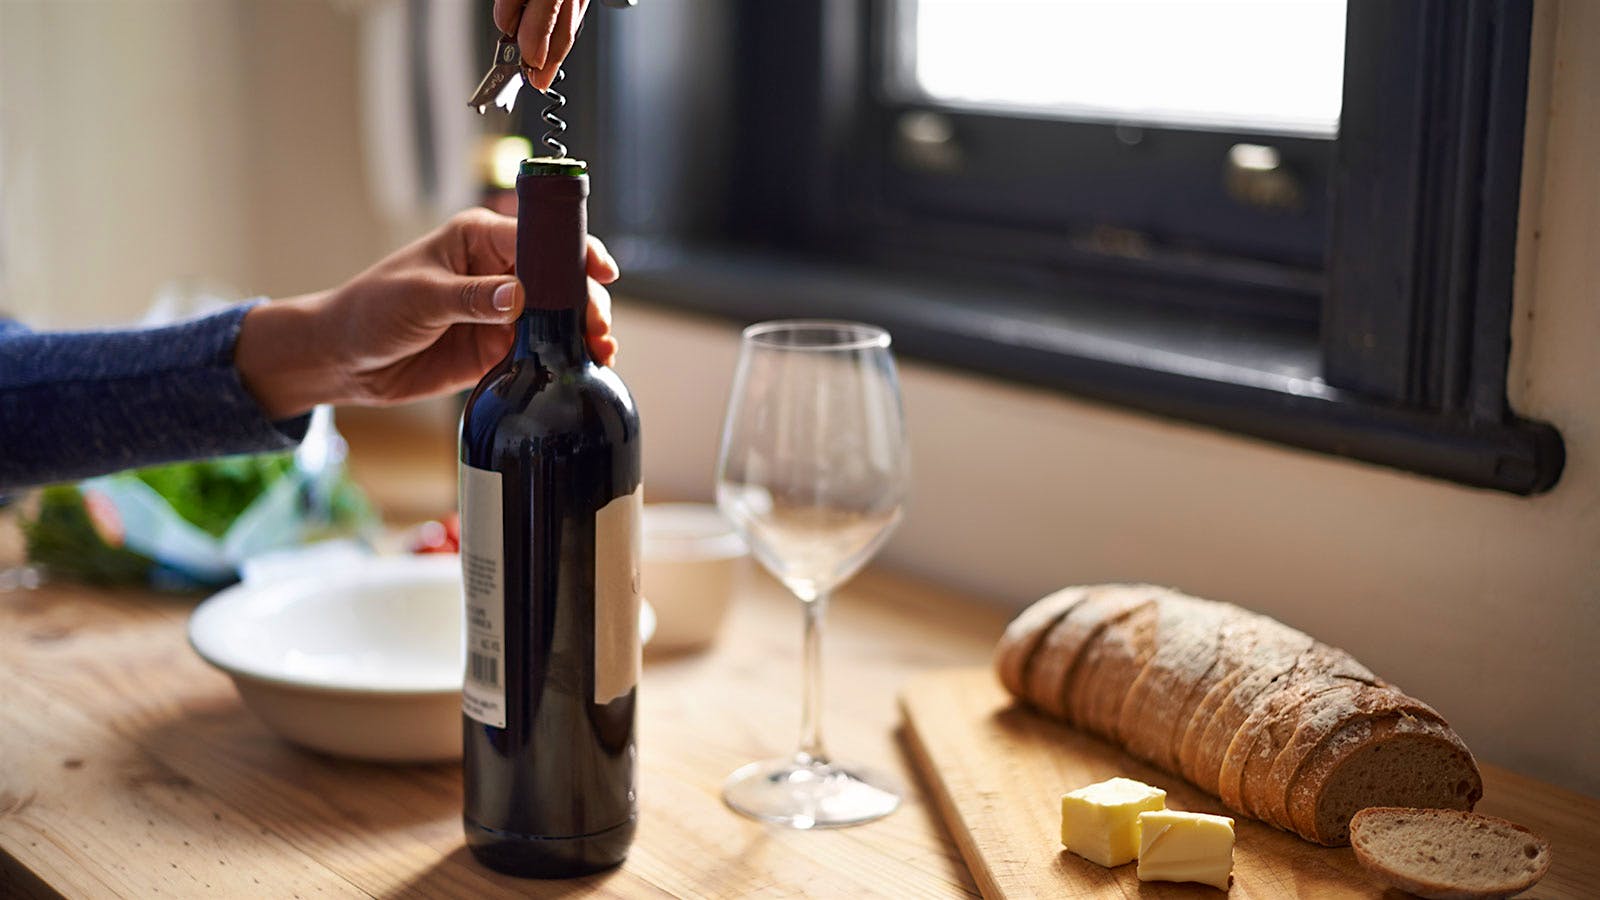 For Maximum Health Benefits, Have Your Wine with a Meal